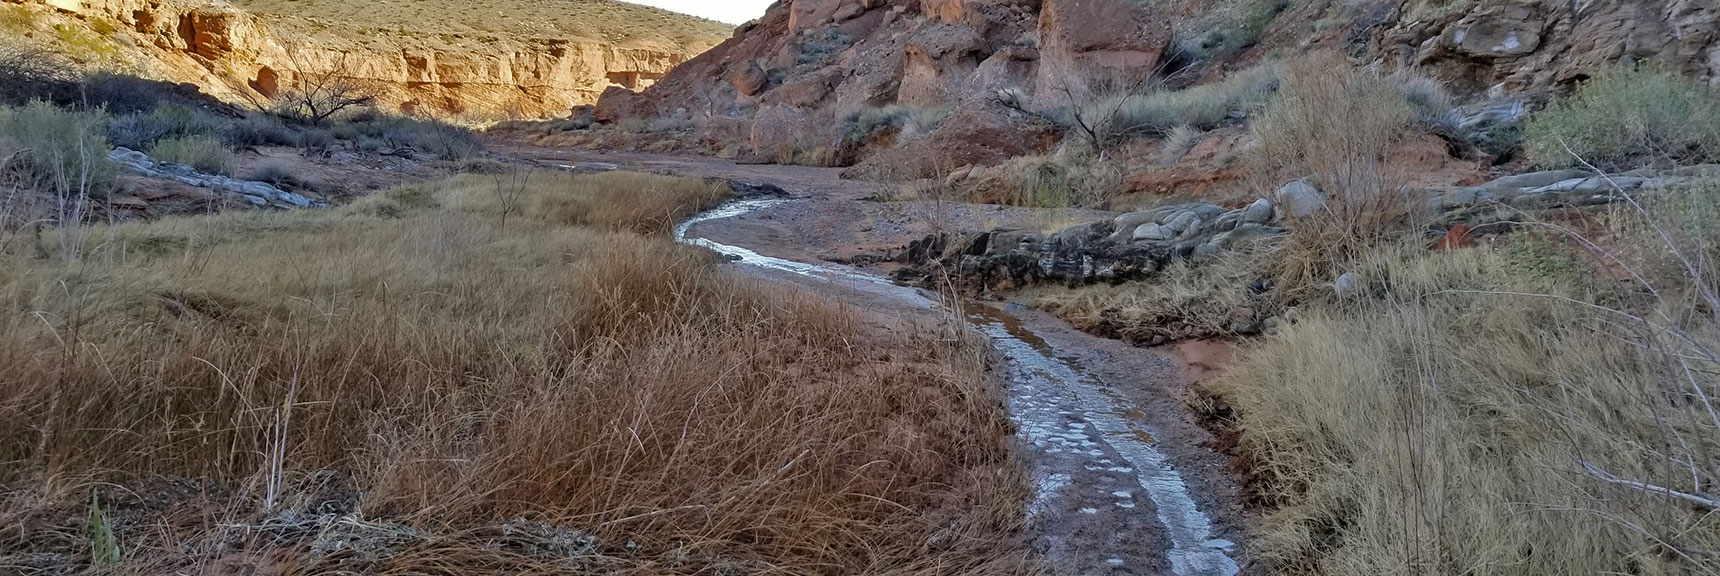 Traveling Beyond the Oasis on Charlie's Spring Trail, Valley of Fire State Park, Nevada